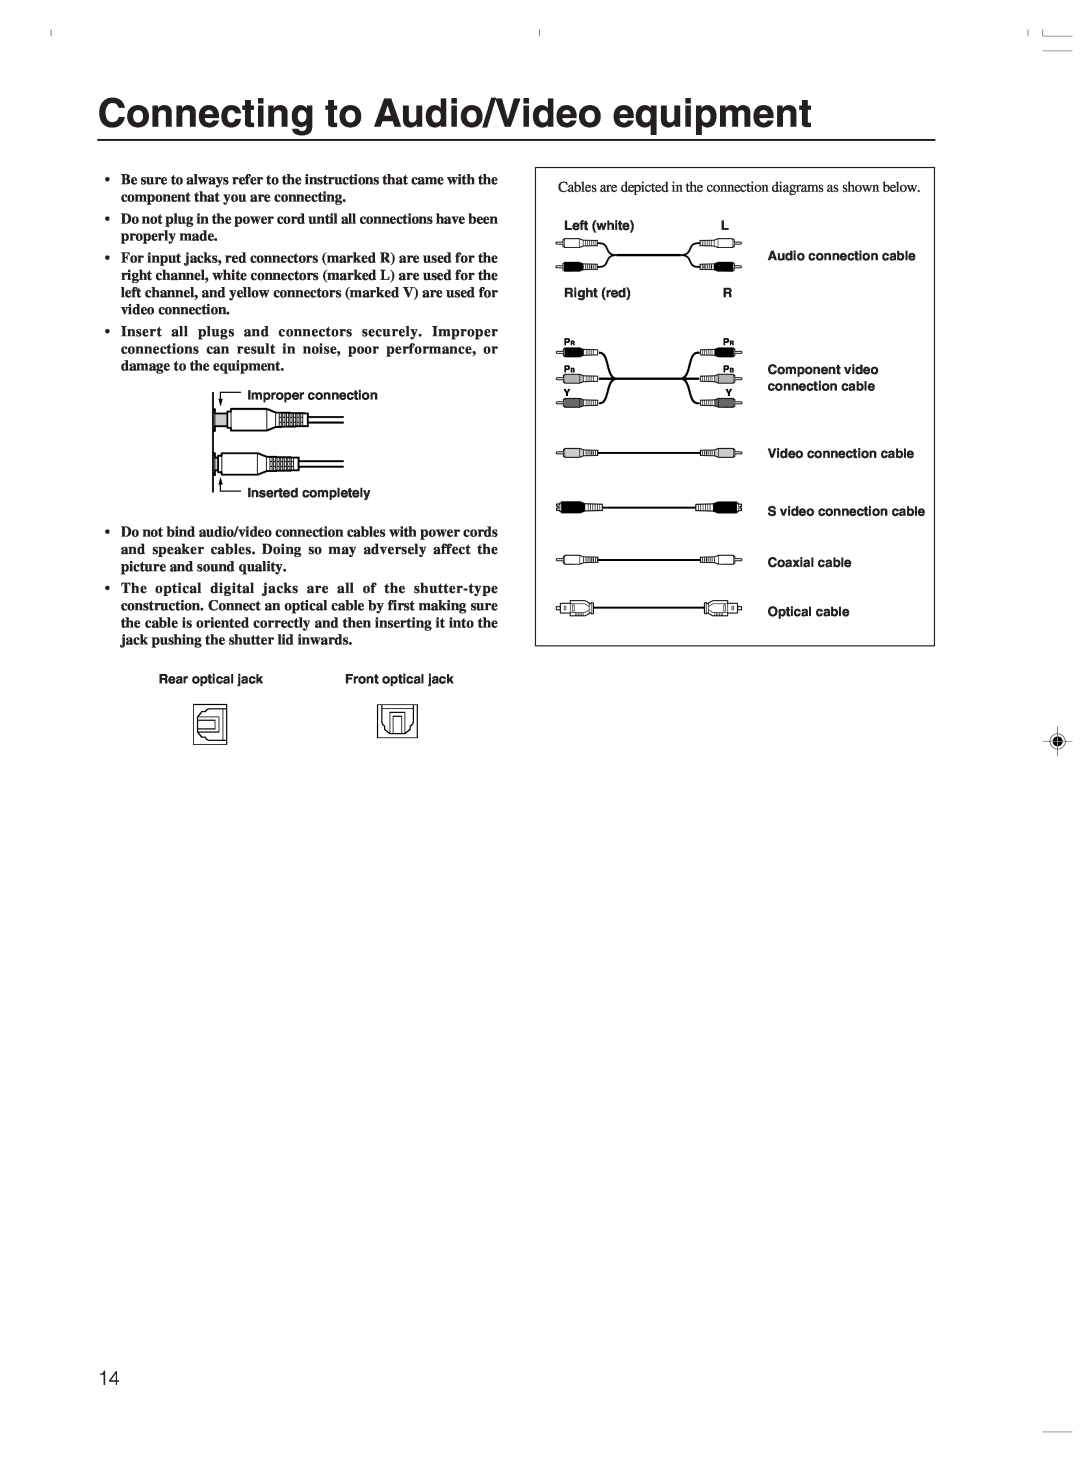 Integra DTR-7.3 instruction manual Connecting to Audio/Video equipment 